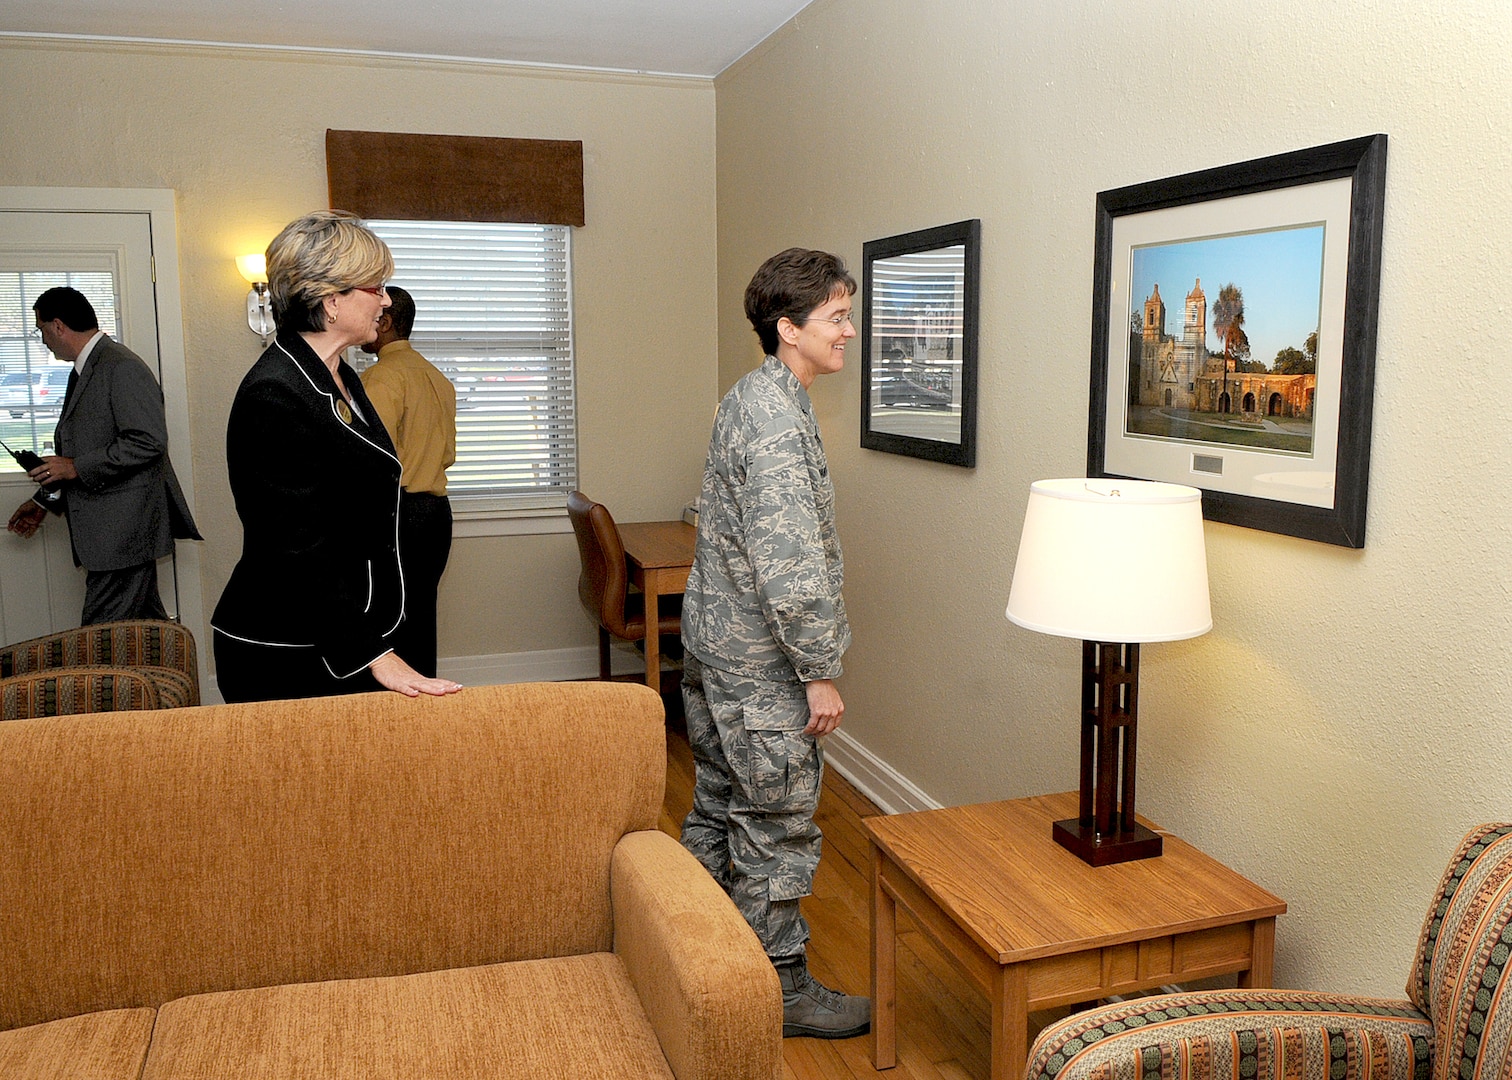 A new Temporary Lodging Facility is inspected by Col. Jacqueline Van Ovost, 12th Flying Training Wing commander, following a ribbon cutting ceremony Nov. 3 at Randolph Air Force Base. On the left is Mary Heagerty, 12th Force Support Squadron director, who hosted the commander to a tour of the newly renovated lodging facility.  (U.S. Air Force photo by David Terry)